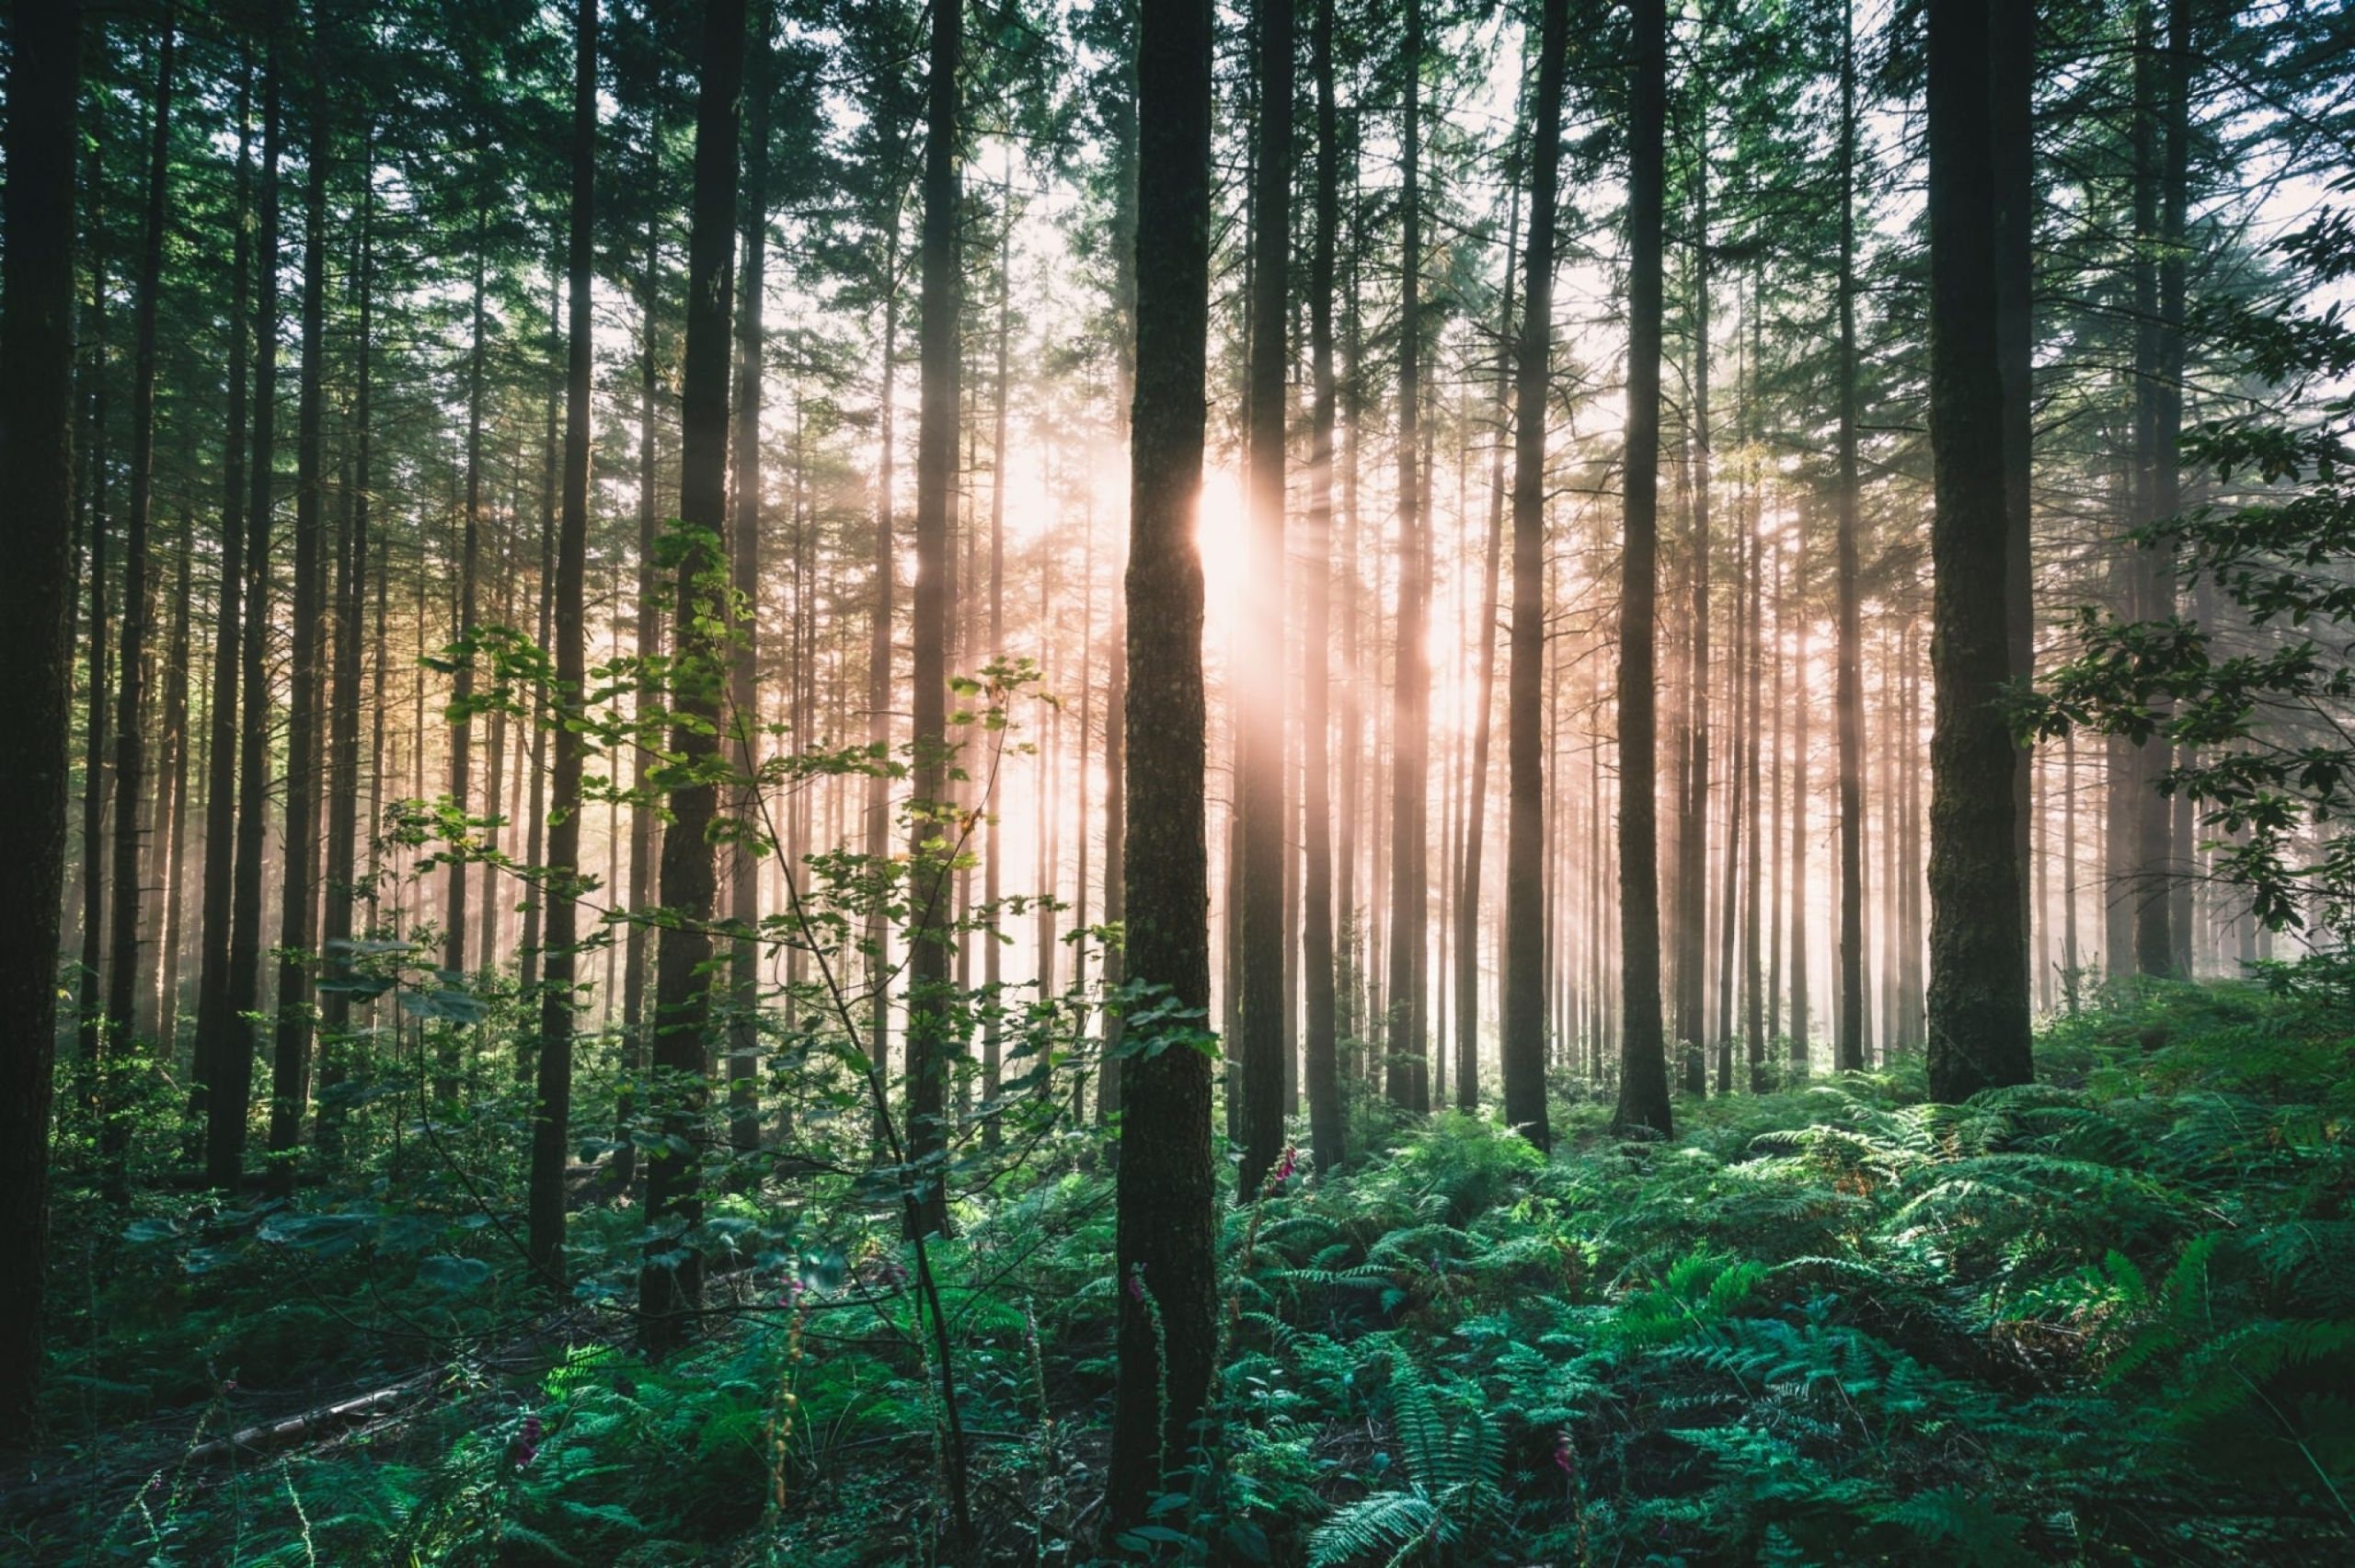 Pale light breaking through the fog in a forest